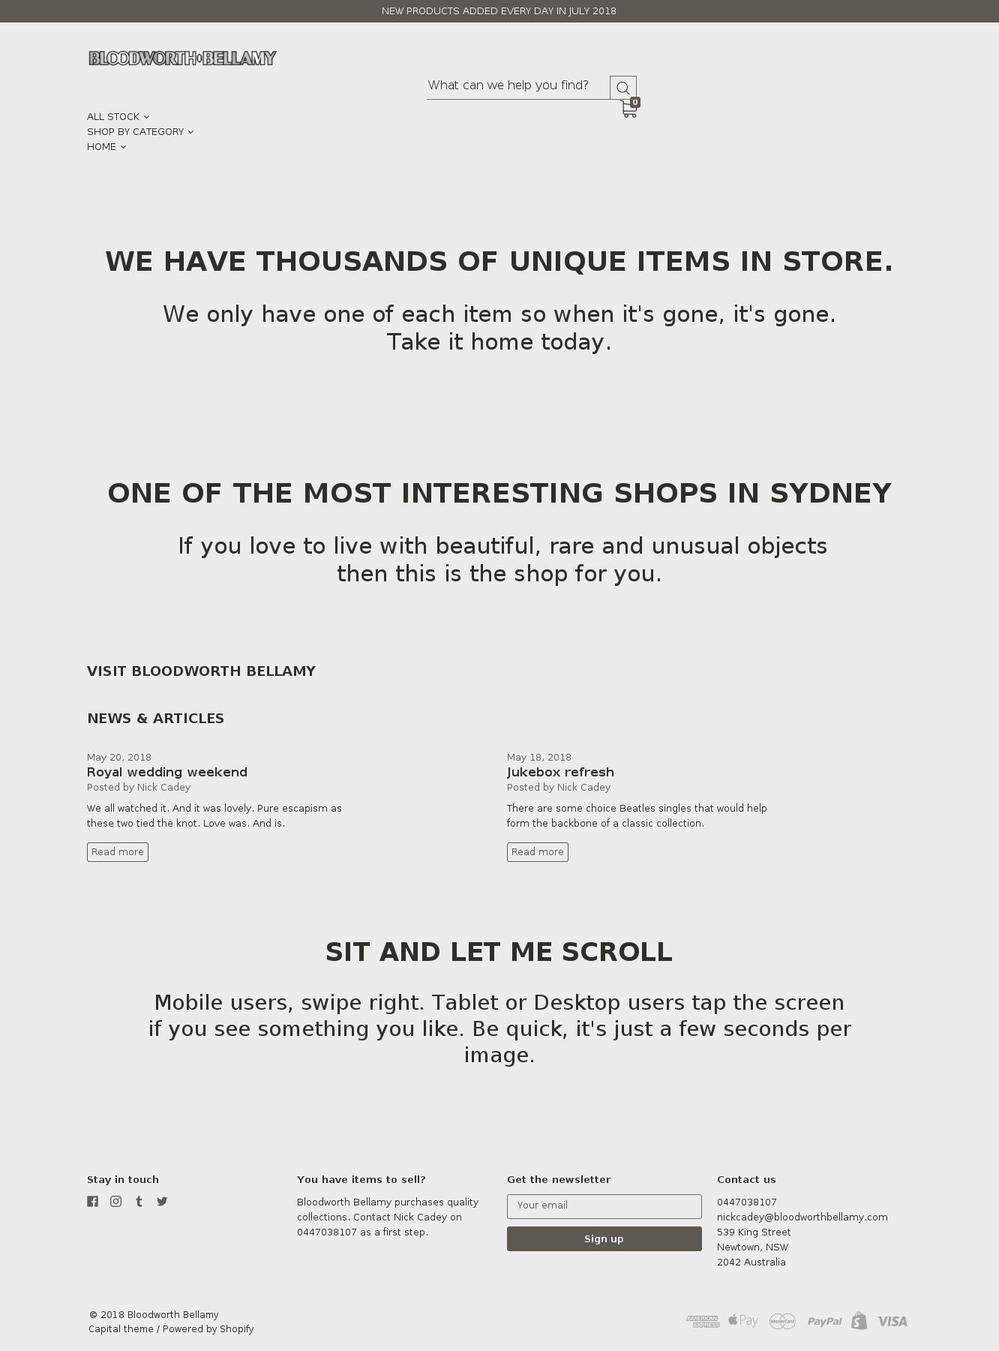 Capital Shopify theme site example bloodworthbellamy.com